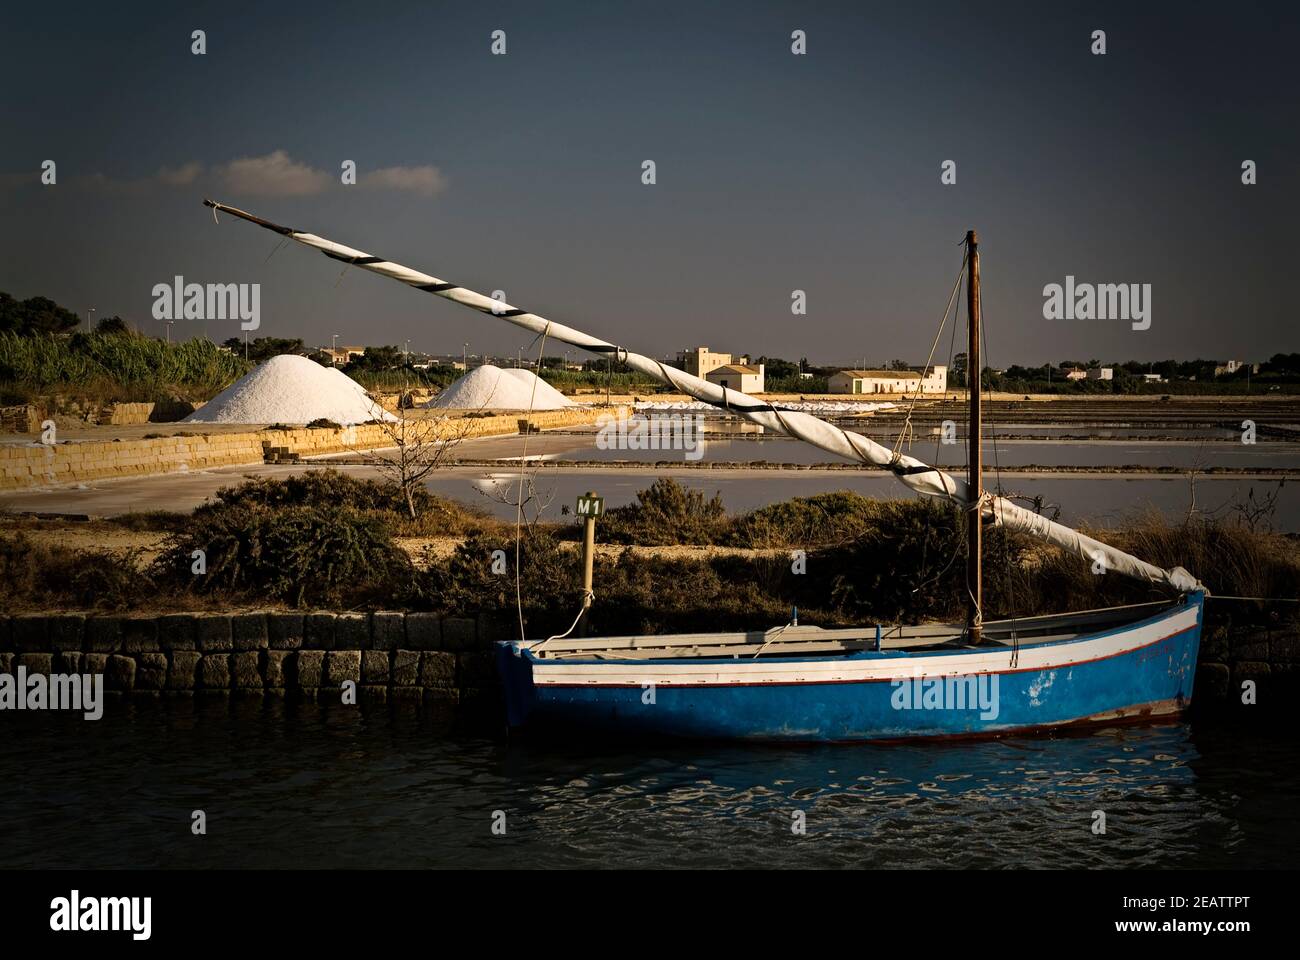 A boat is docked next to a body of water, salt pans in Marsala, Sicily Stock Photo